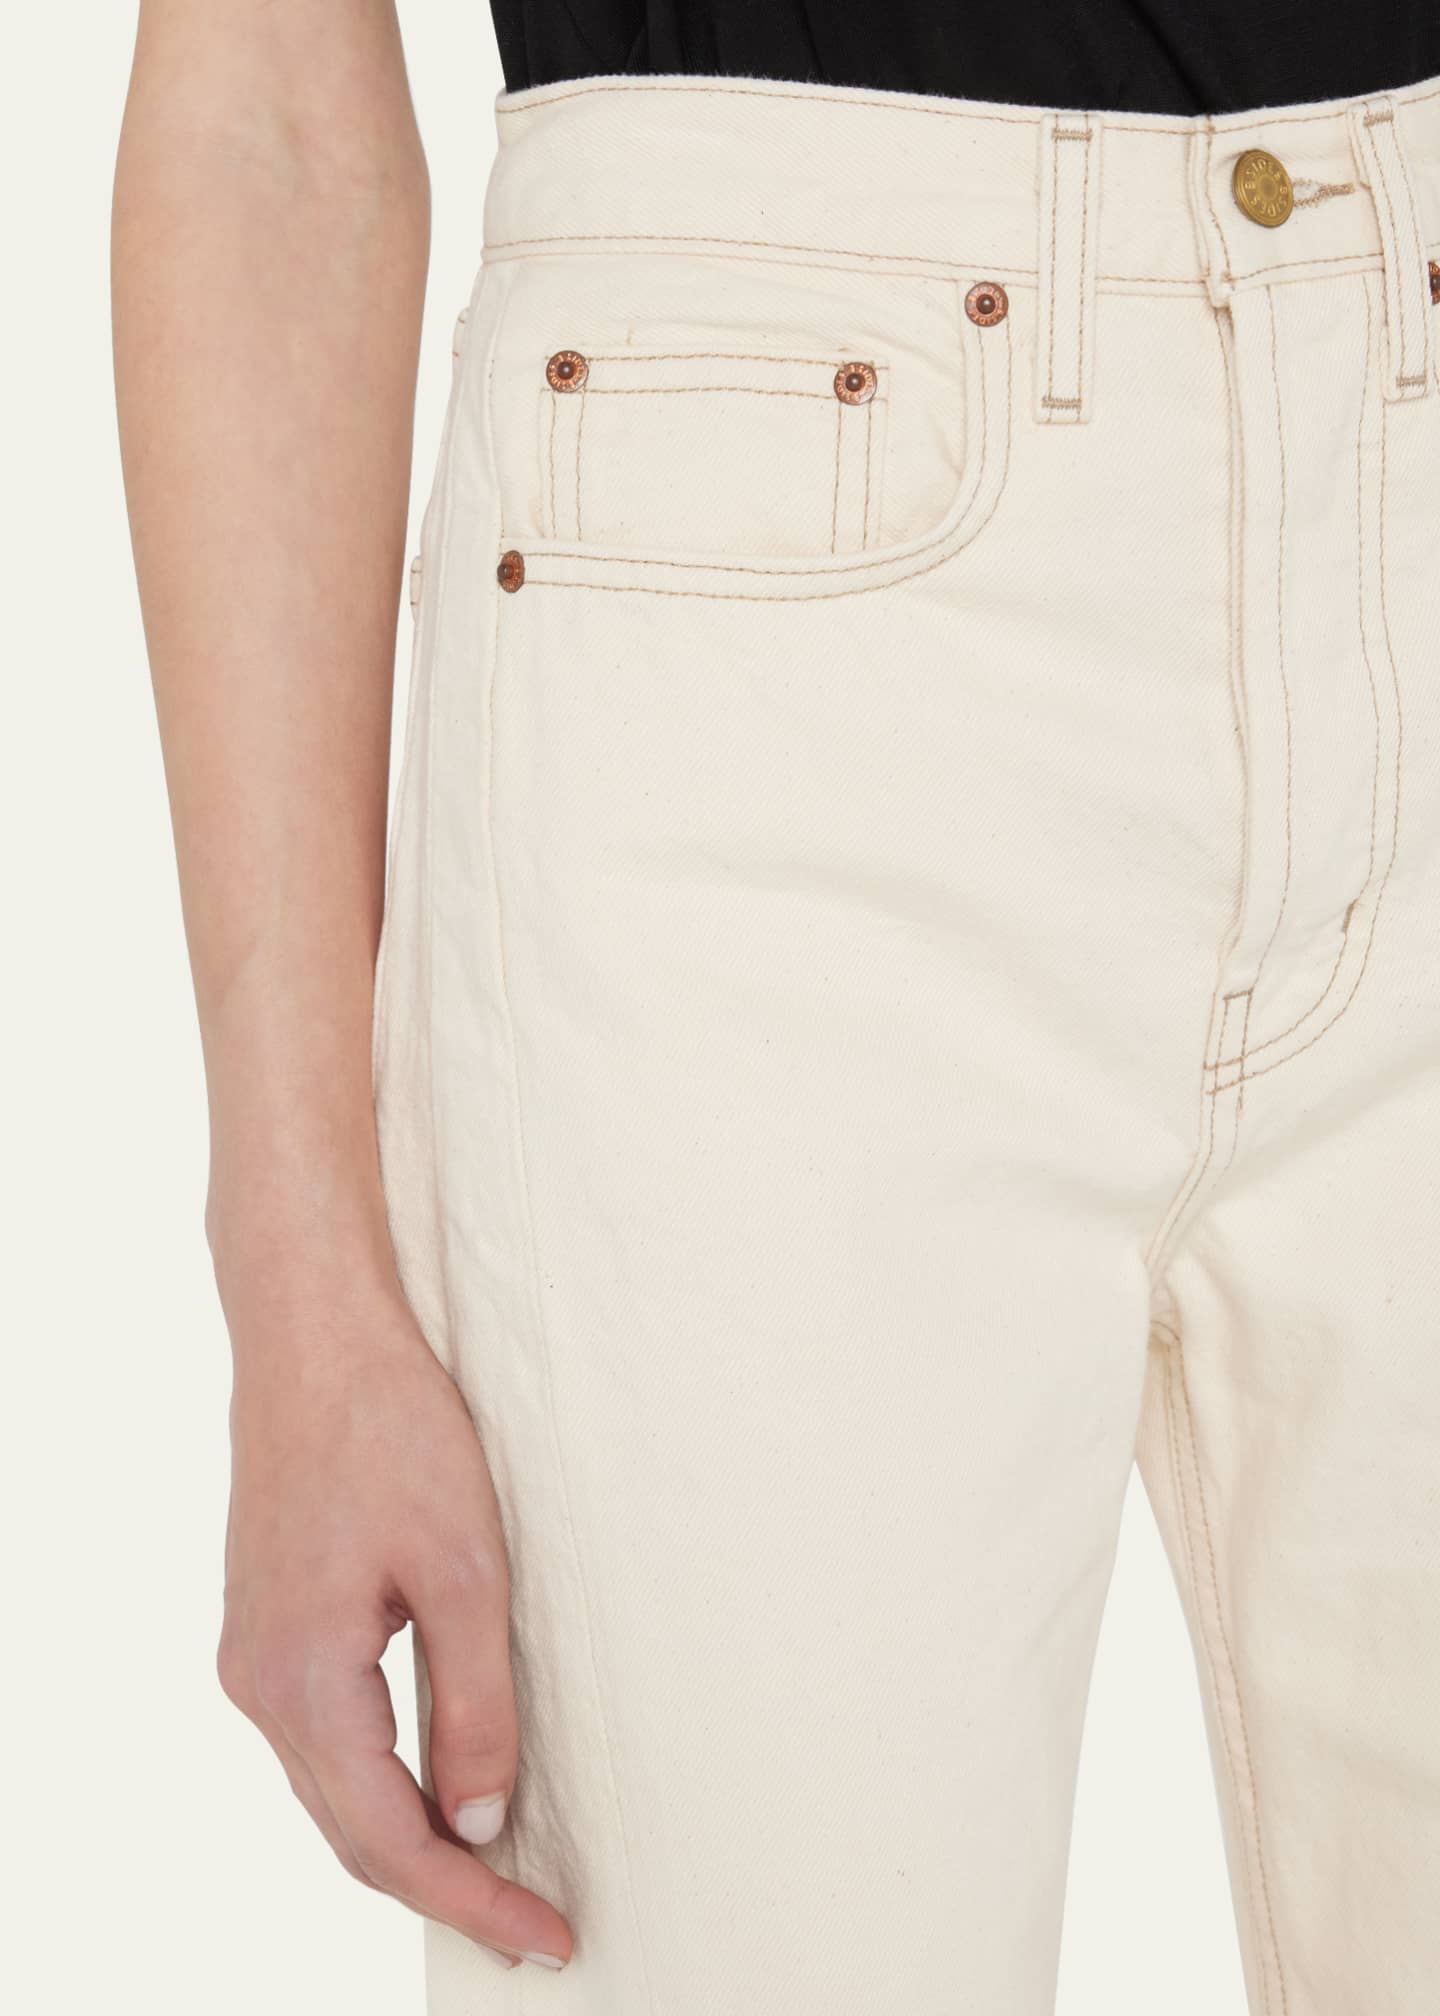 B SIDES Lasso Cropped Wide Frayed Jeans - Bergdorf Goodman